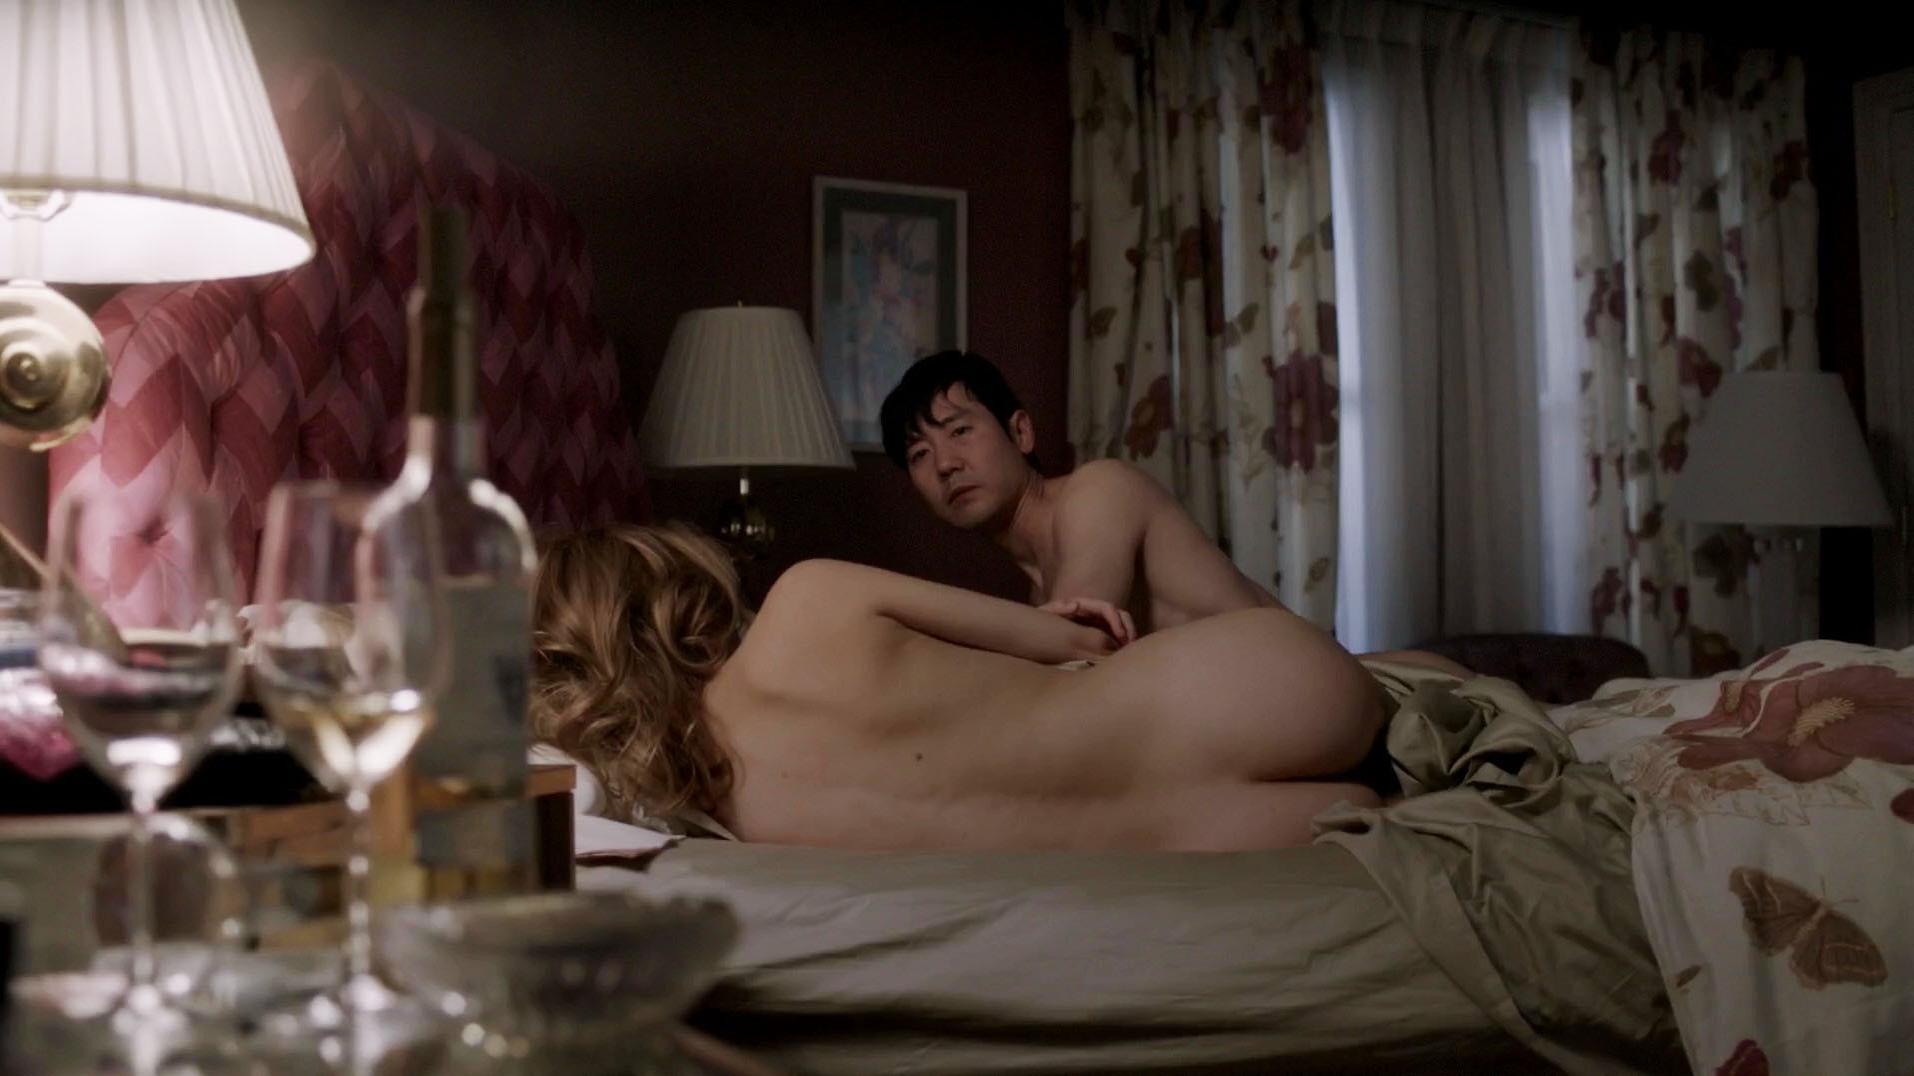 Keri Russell nude - The Americans s04e09 (2016) .